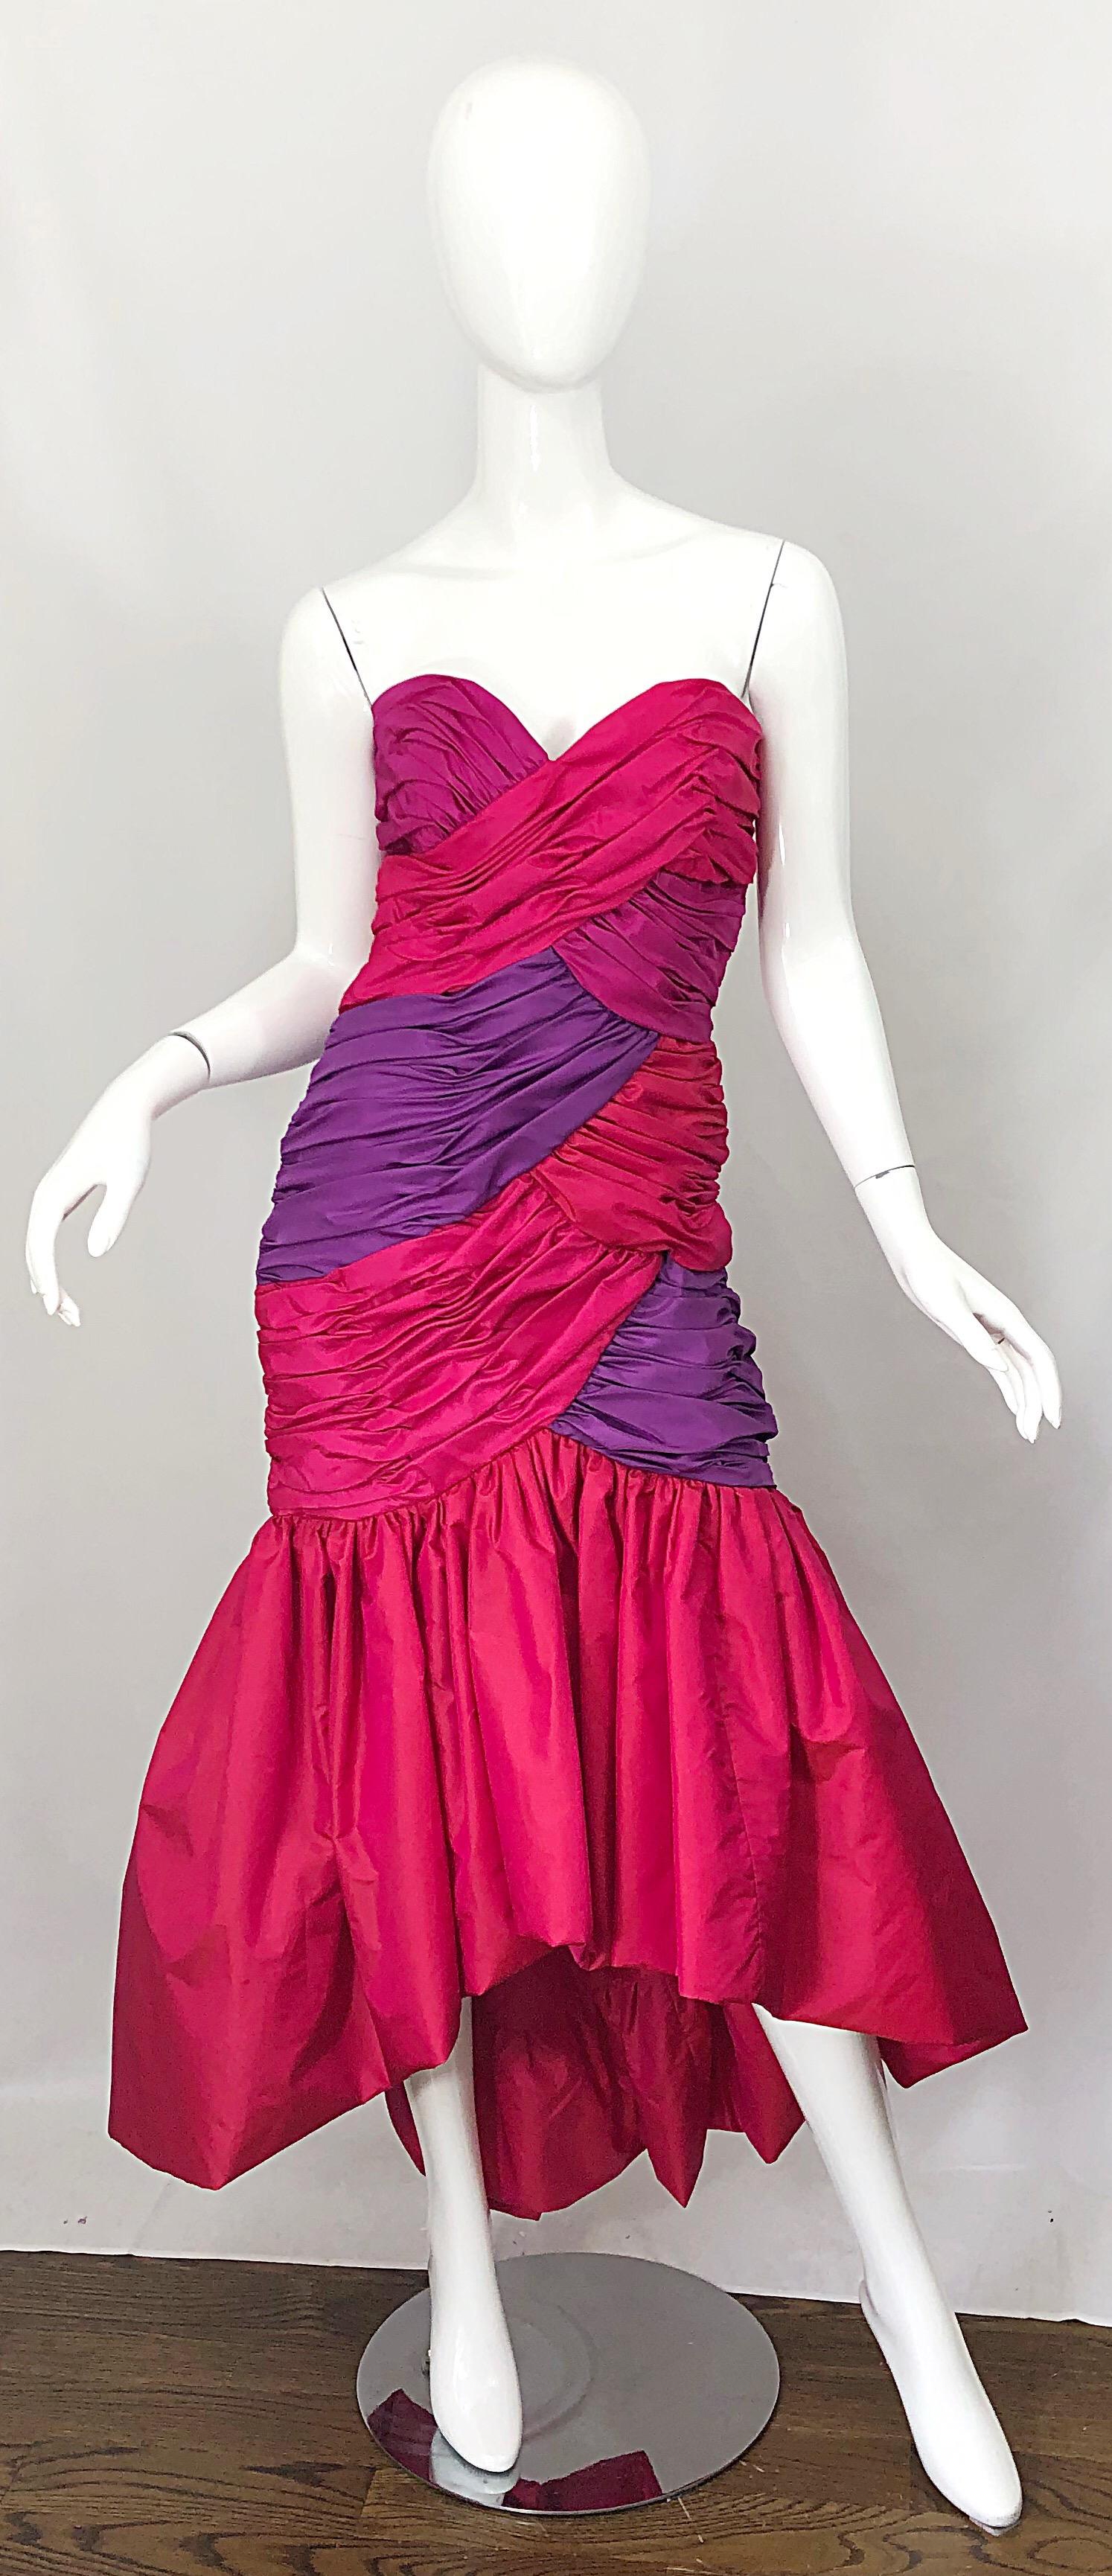 Incredible Avant Garde 1980s VICTOR COSTA lipstick red, fuchsia pink and purple color block strapless hi-lo flamenco style evening gown! Flattering ruched boned bodice holds everything in place. Hidden zipper up the back with hook-and-eye closure.